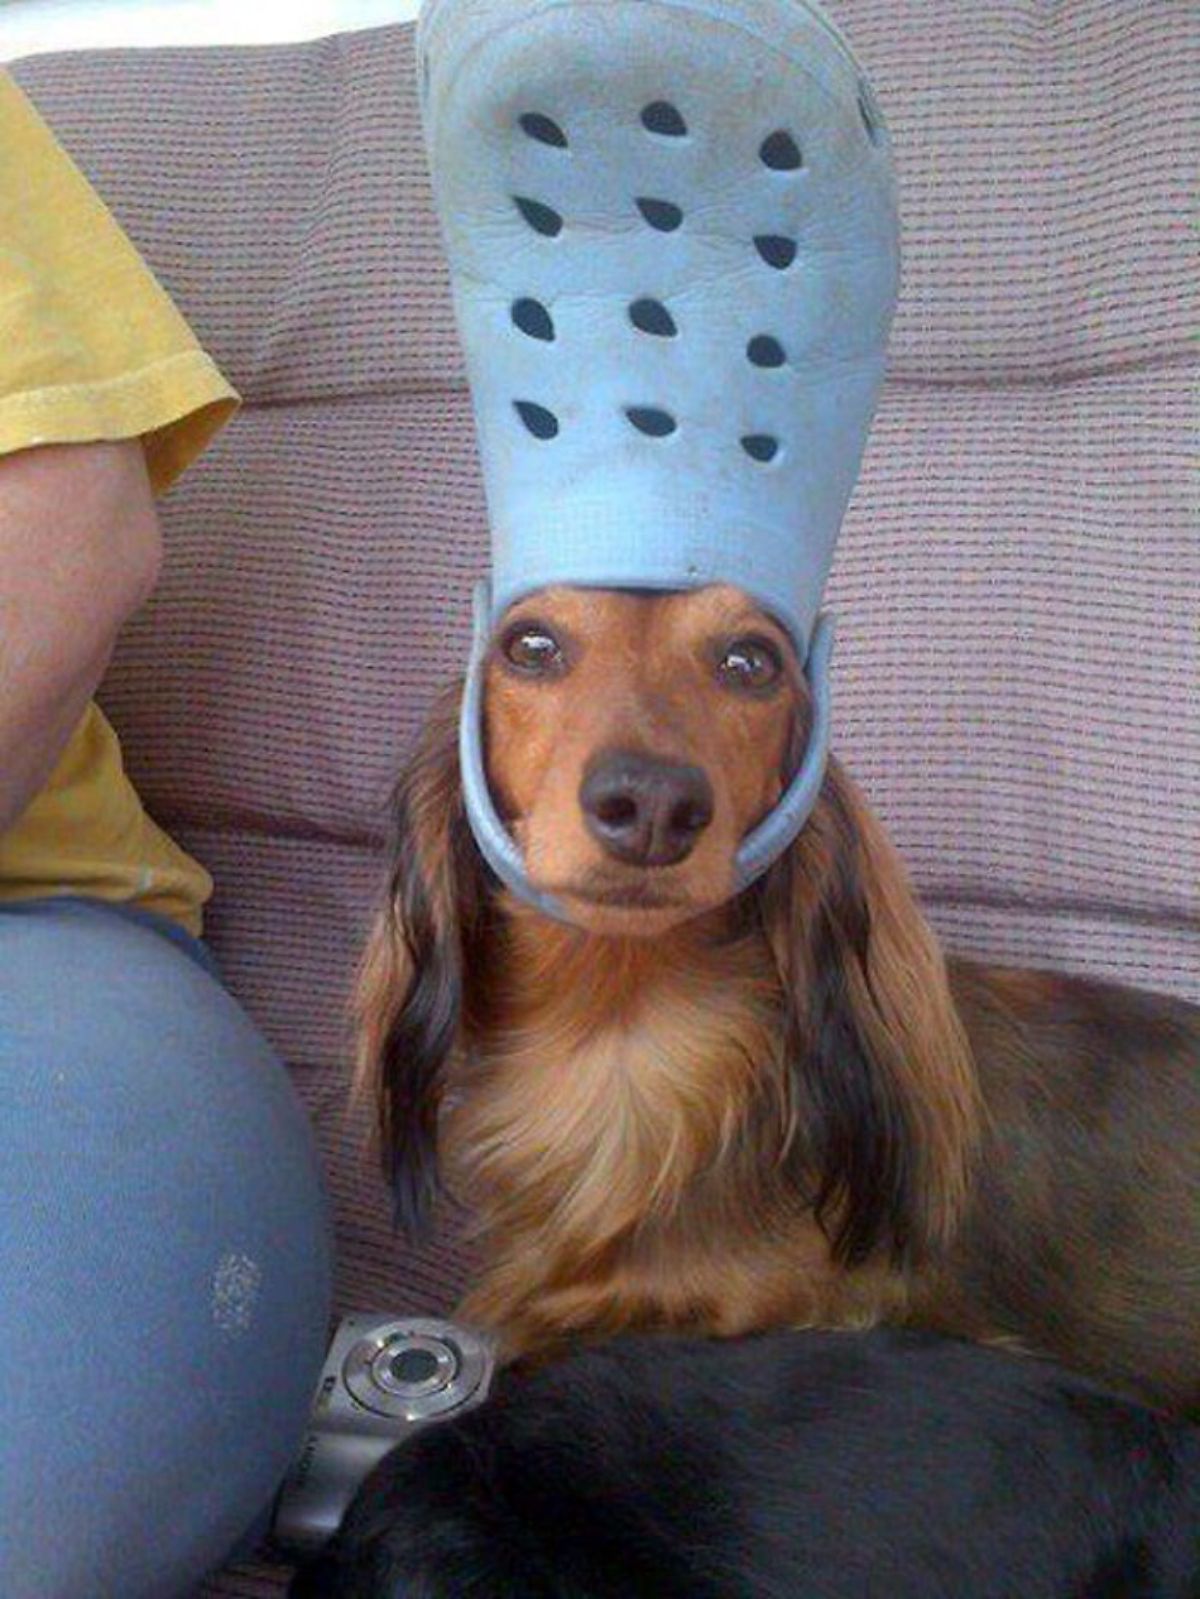 brown and black dog on a brown sofa wearing blue crocs slipper on the head